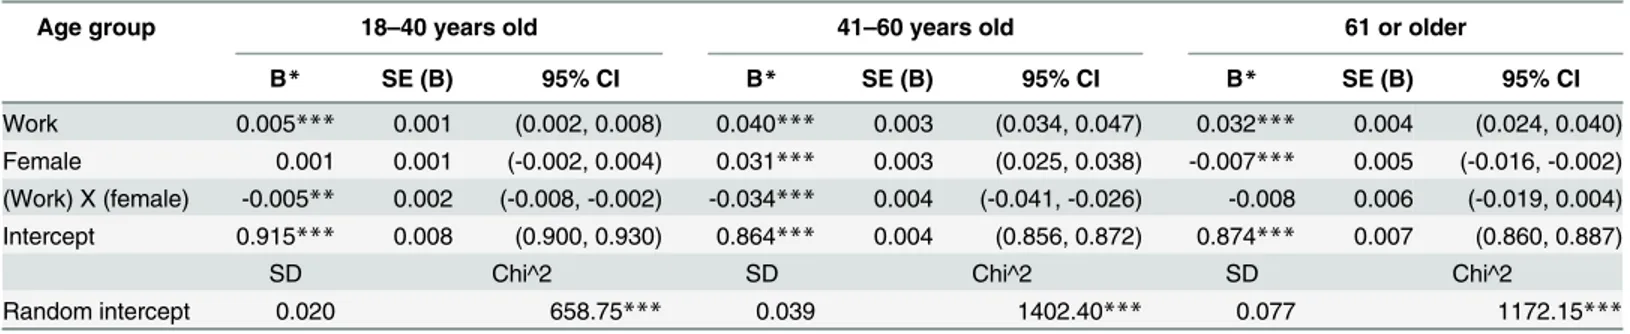 Table 3. Random effect panel regression model of EQ-5D by age group.